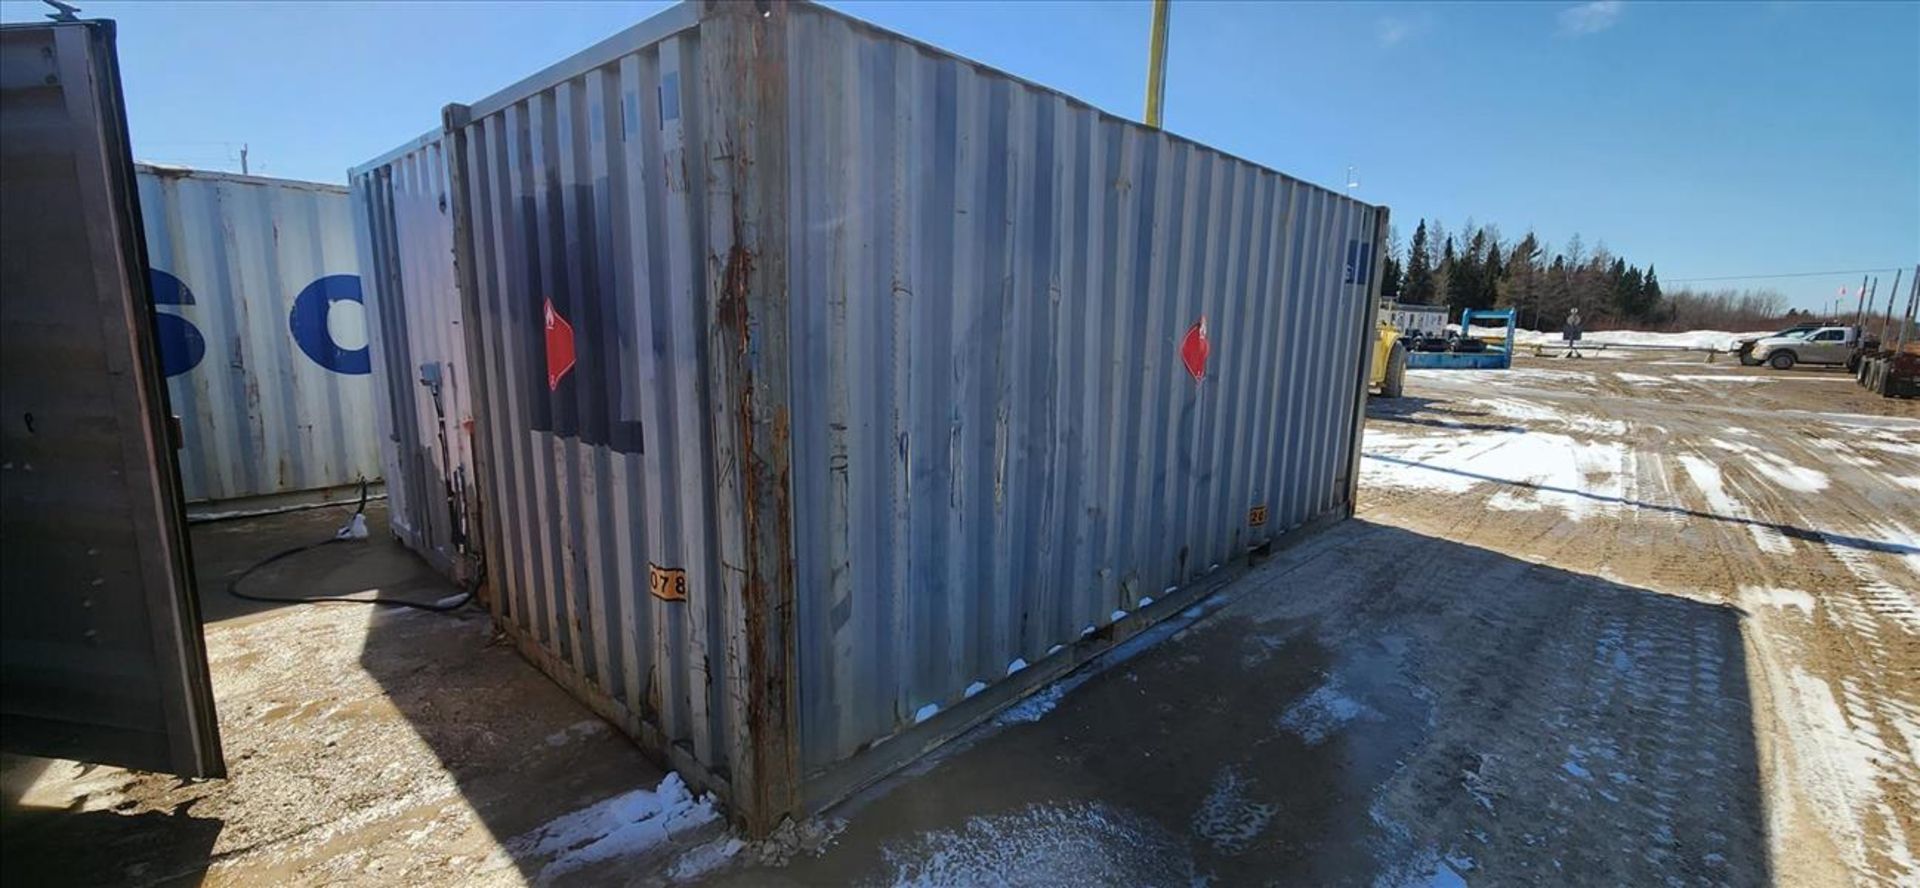 sea container, 20 ft. (delayed removal date applies) (Asset Location: Hallnor Yard) {Day 1} [TAG - Image 2 of 2